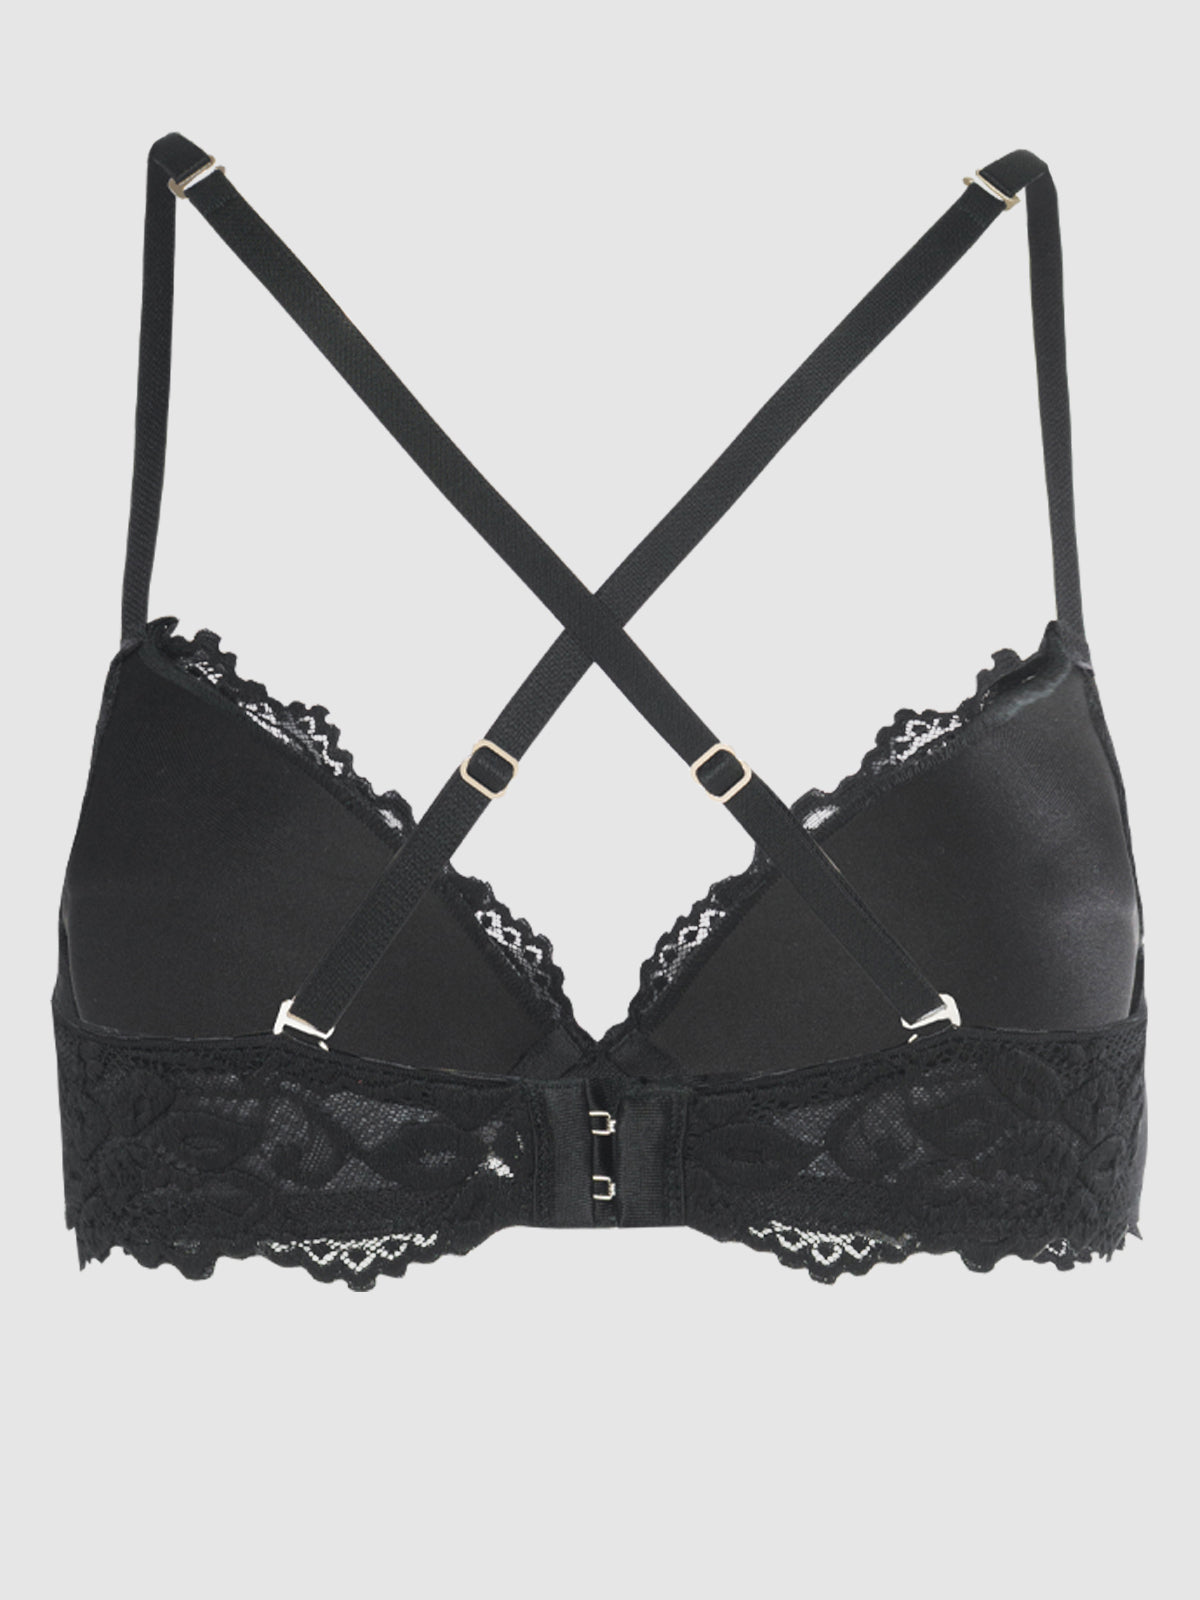 Jessica Polyster Black Lace Bra, Size : 30, 32, 34, 36 at Rs 175